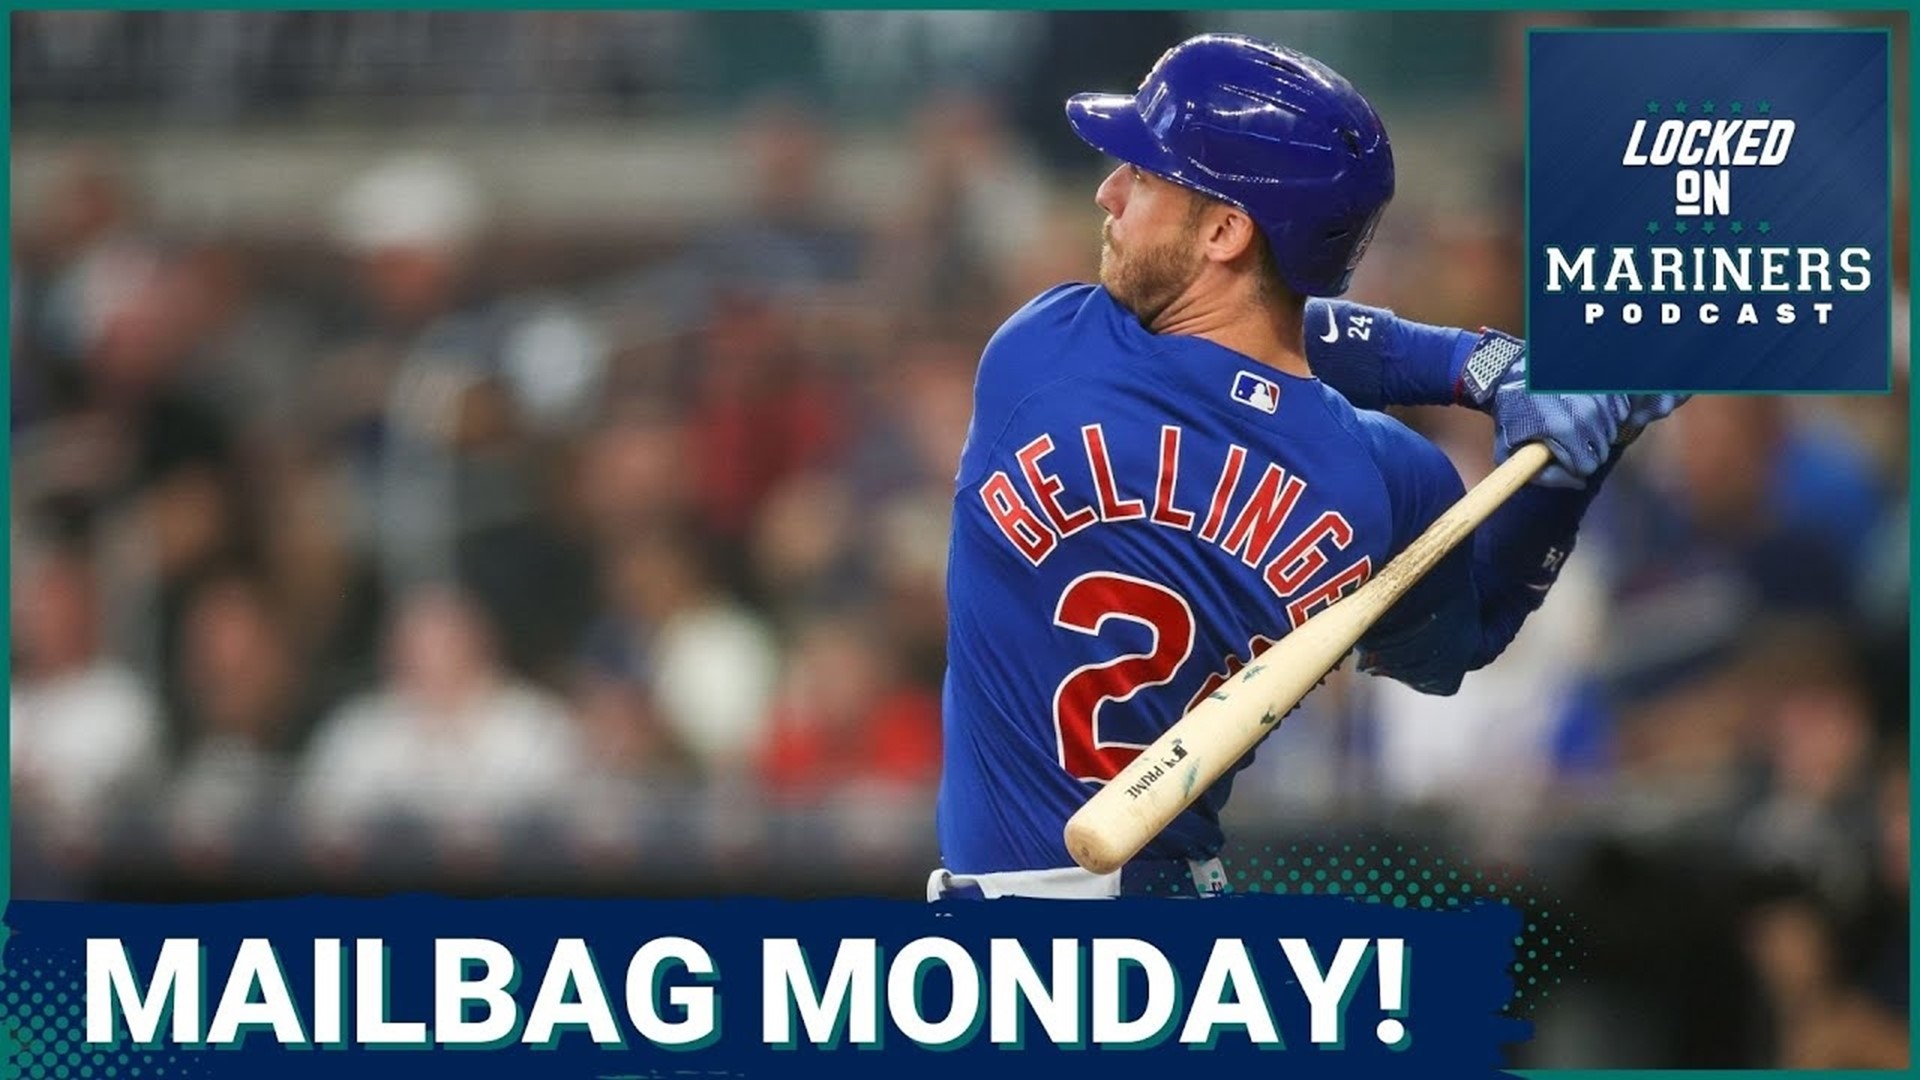 It's Mailbag Monday! Ty and Colby answer some of your questions, including whether or not the Mariners' reported "lurking" in Cody Bellinger's market is legit.